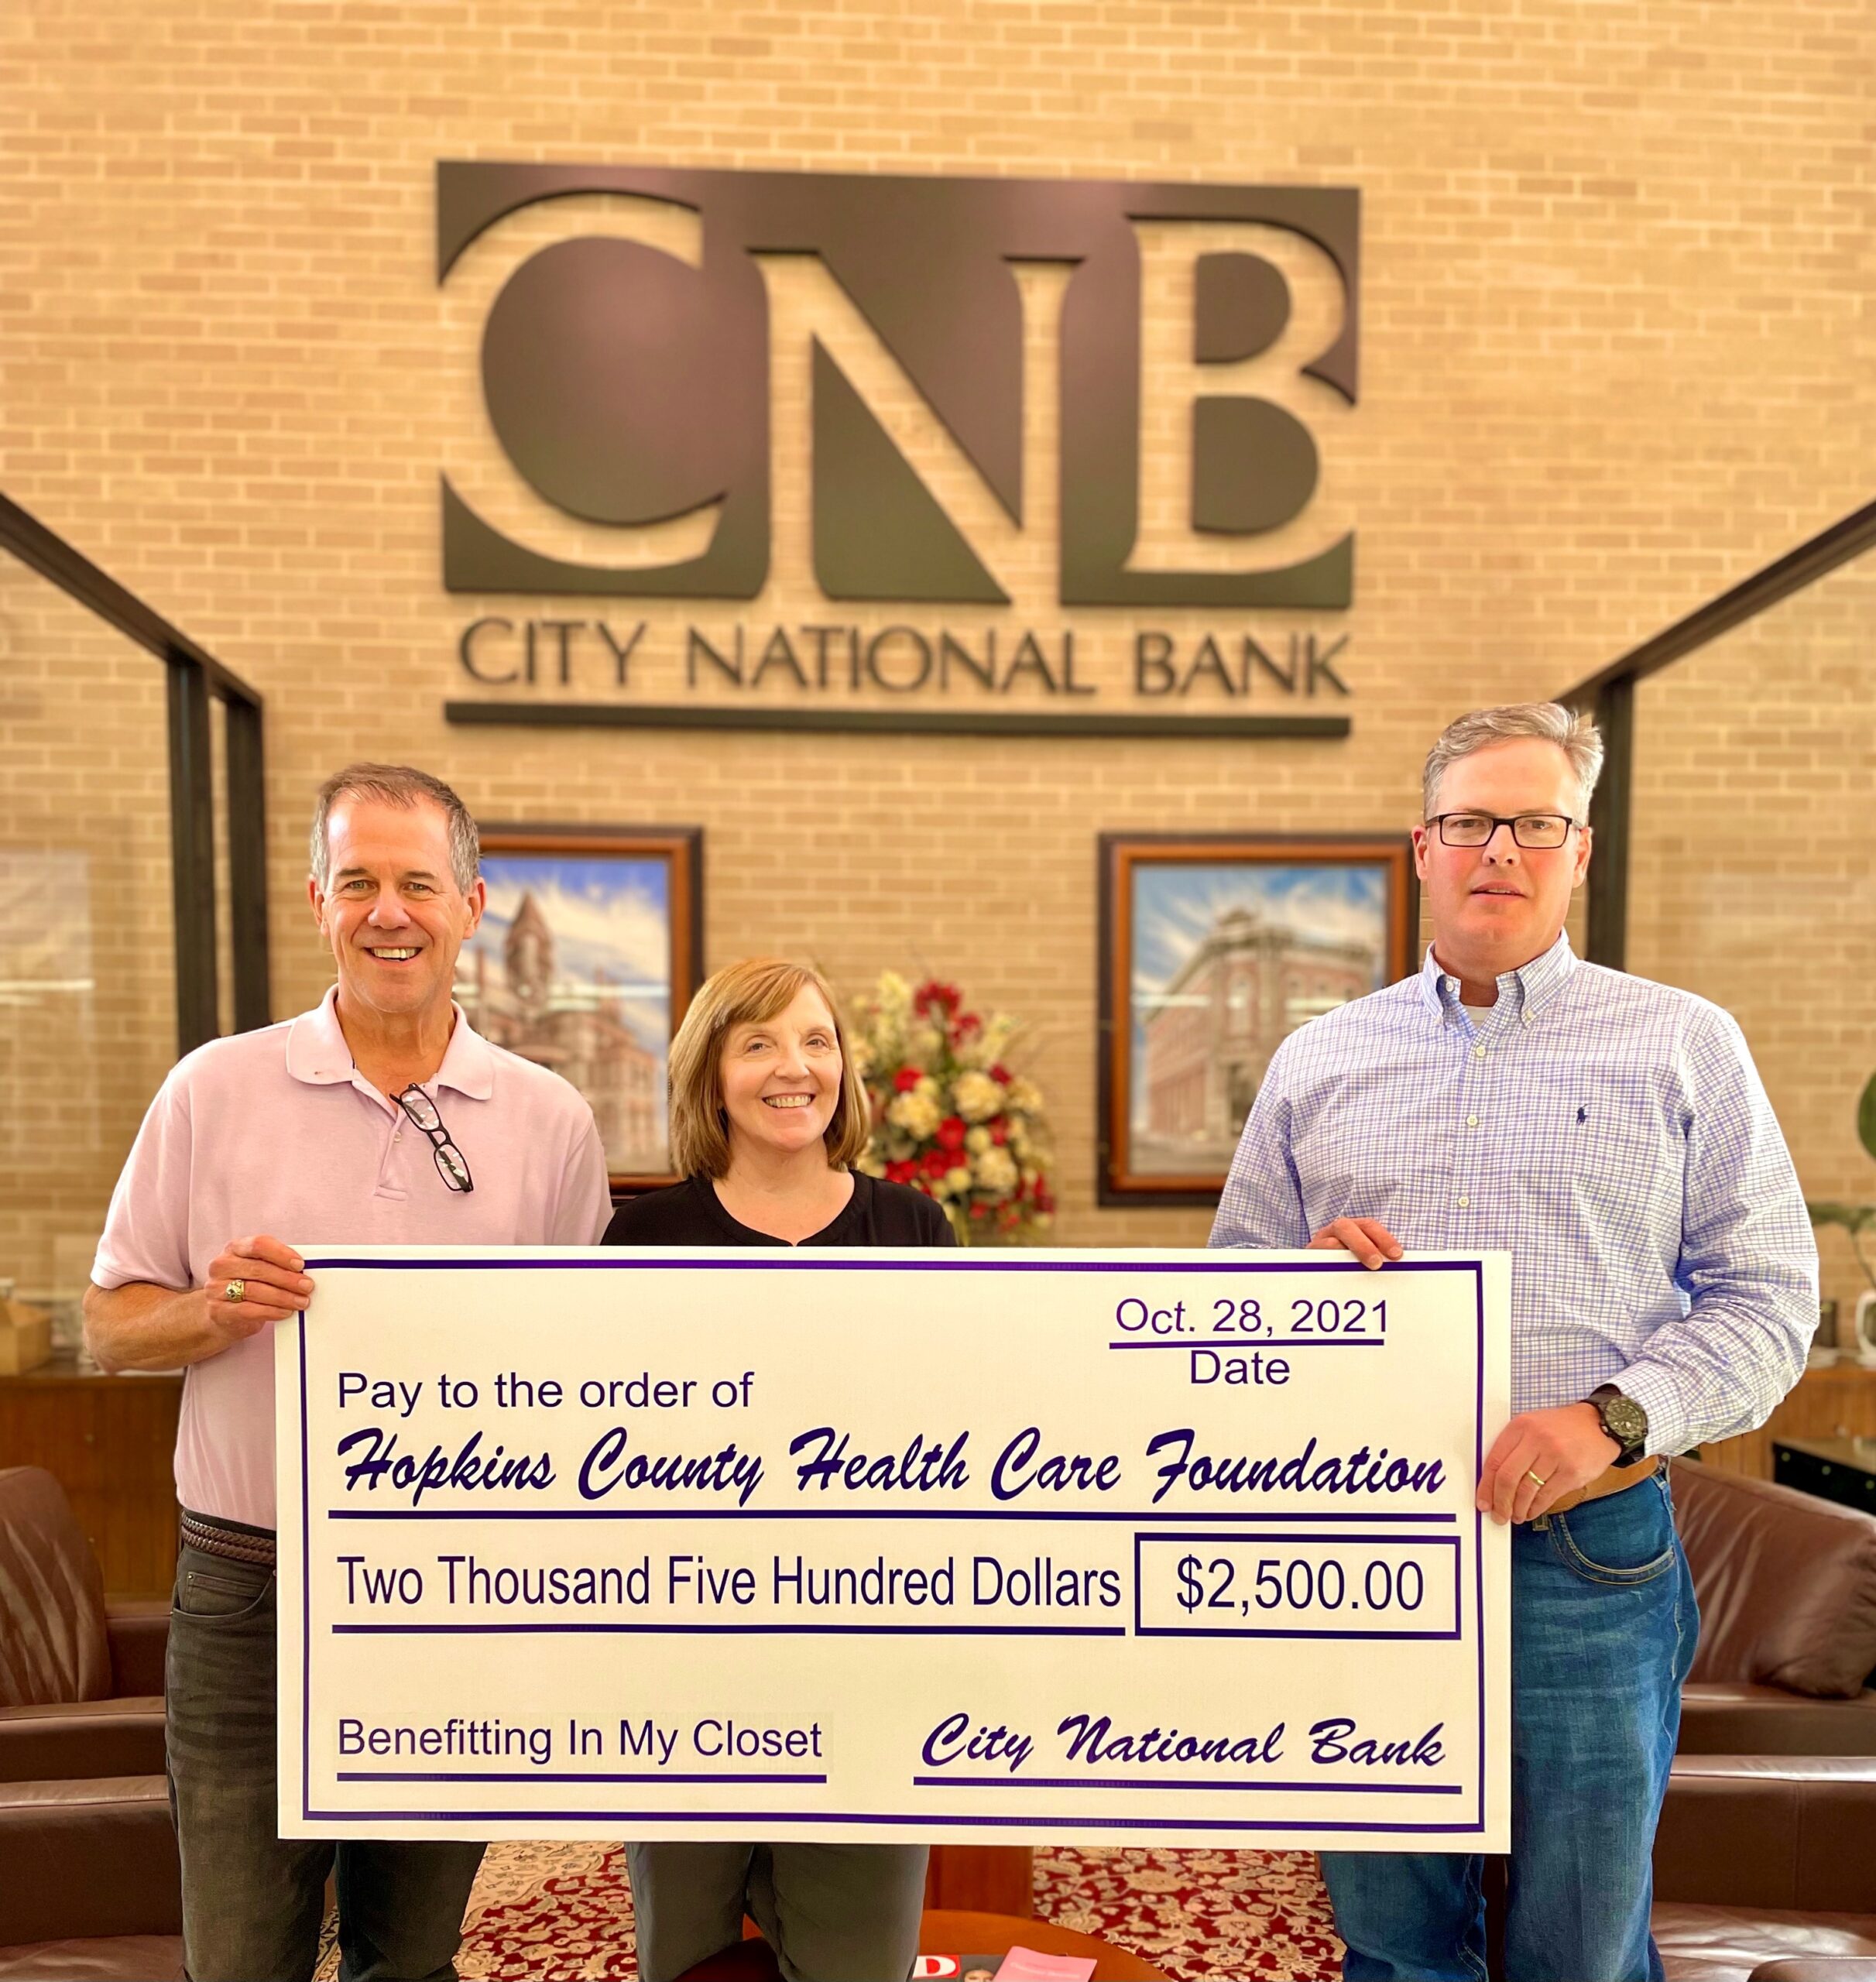 City National Bank donates to help cancer screenings